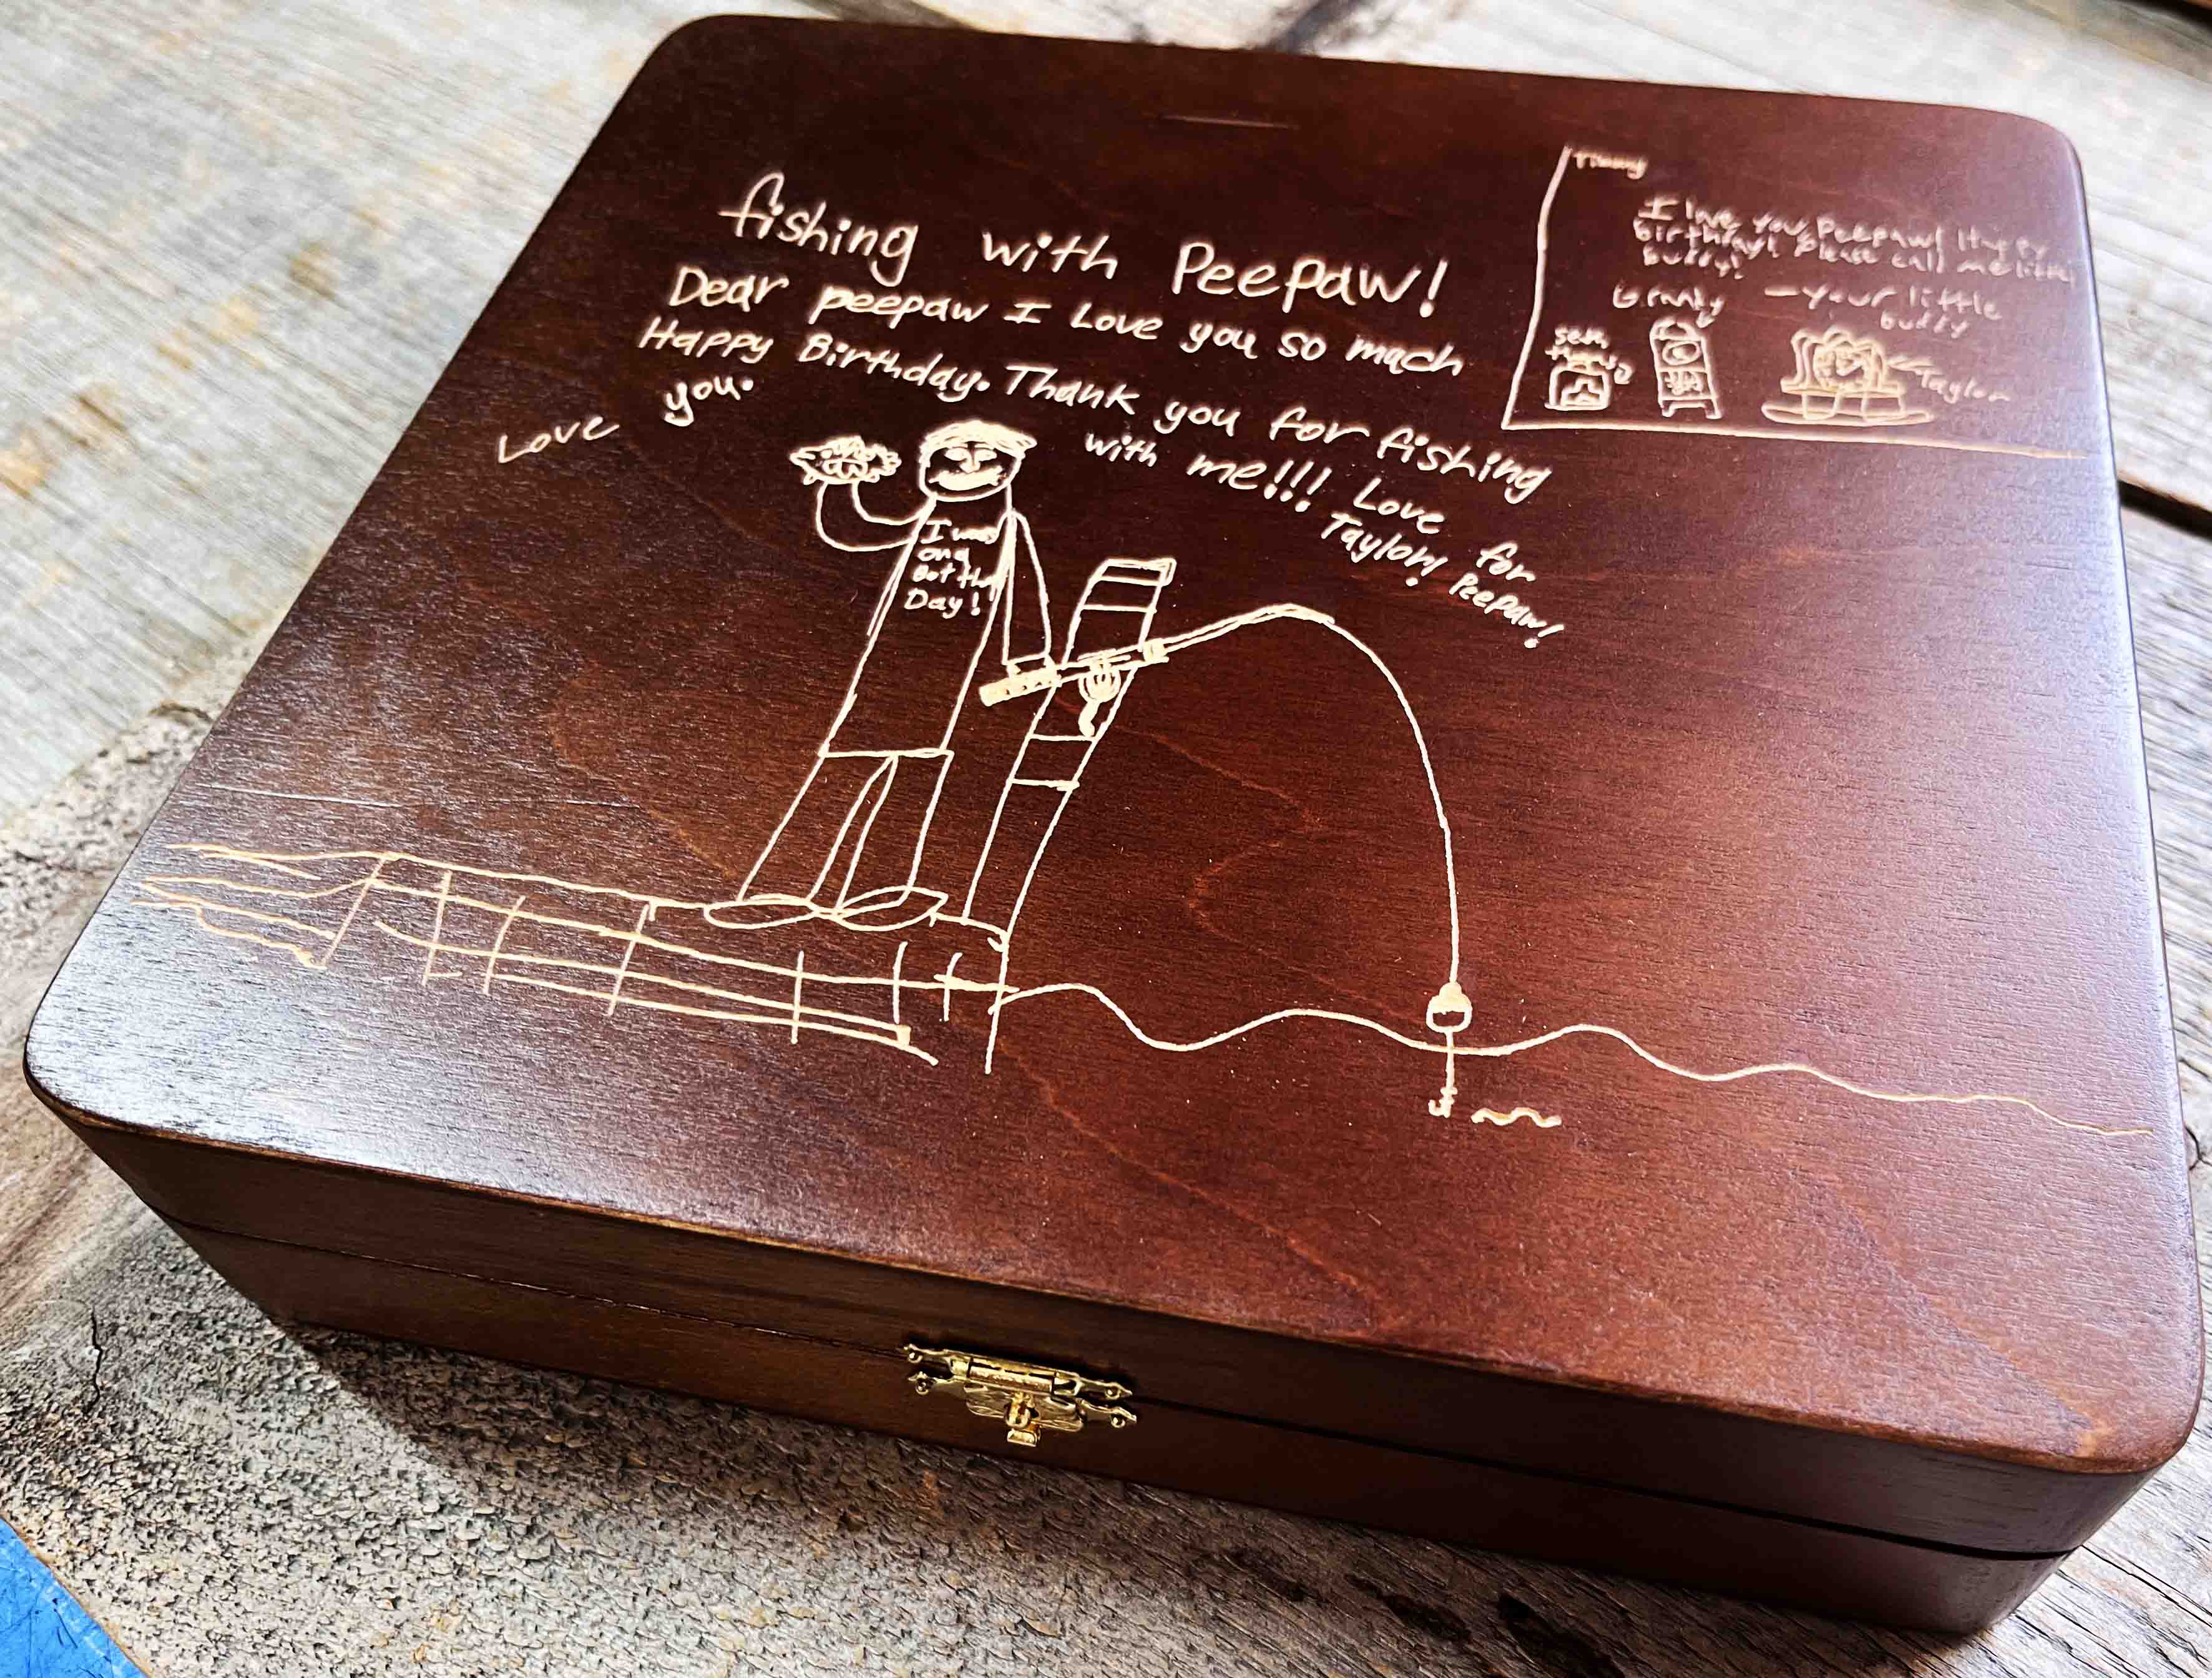 Handwriting Engraved into Premium Wooden Gift Box